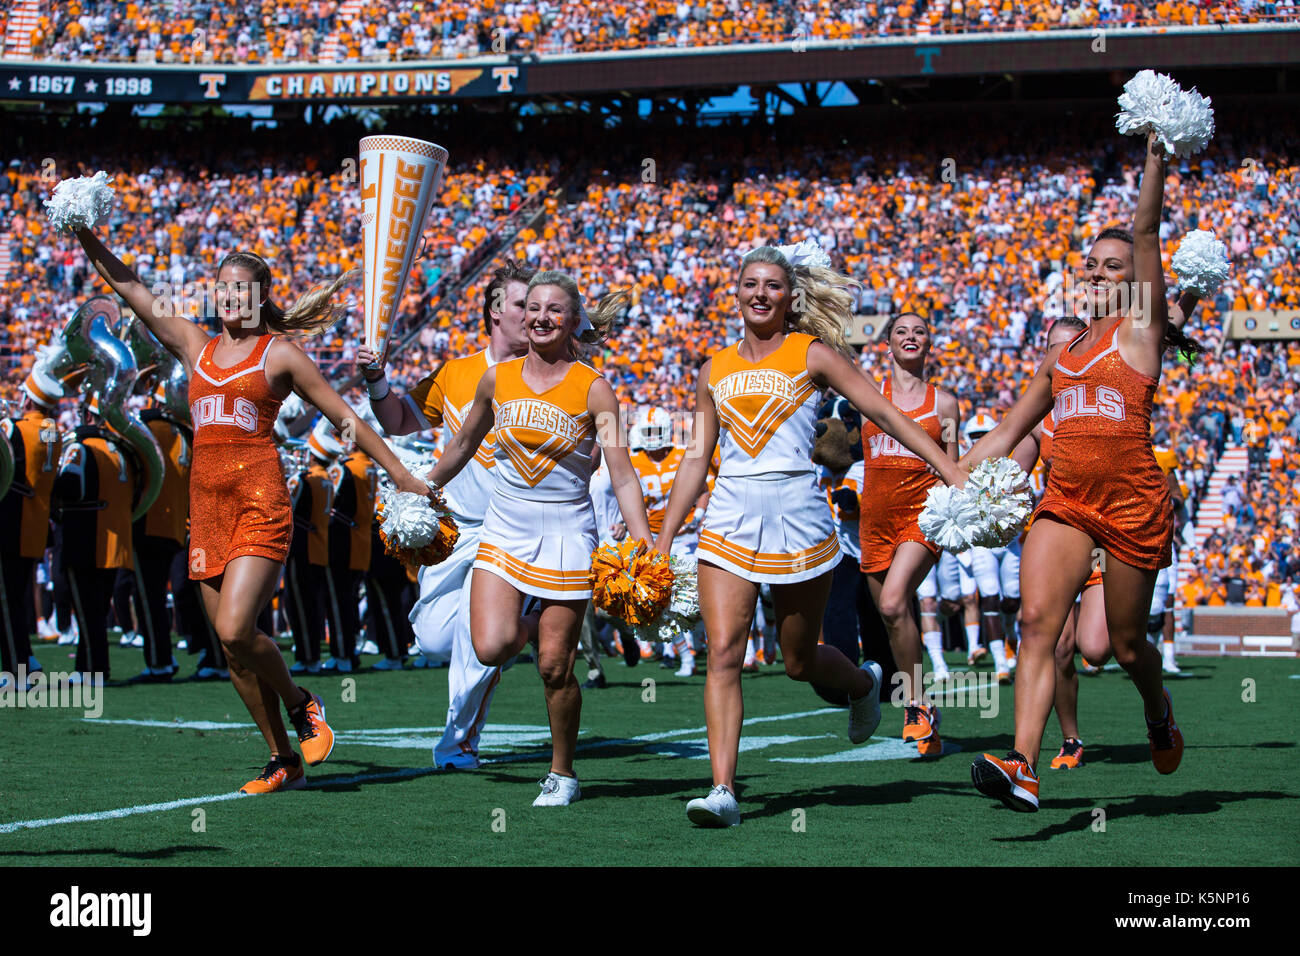 September 09, 2017: Tennessee Volunteers cheerleaders take the field before the NCAA Football game between the University of Tennessee Volunteers and the Indiana State Sycamores at Neyland Stadium in Knoxville, TN Tim Gangloff/CSM Stock Photo